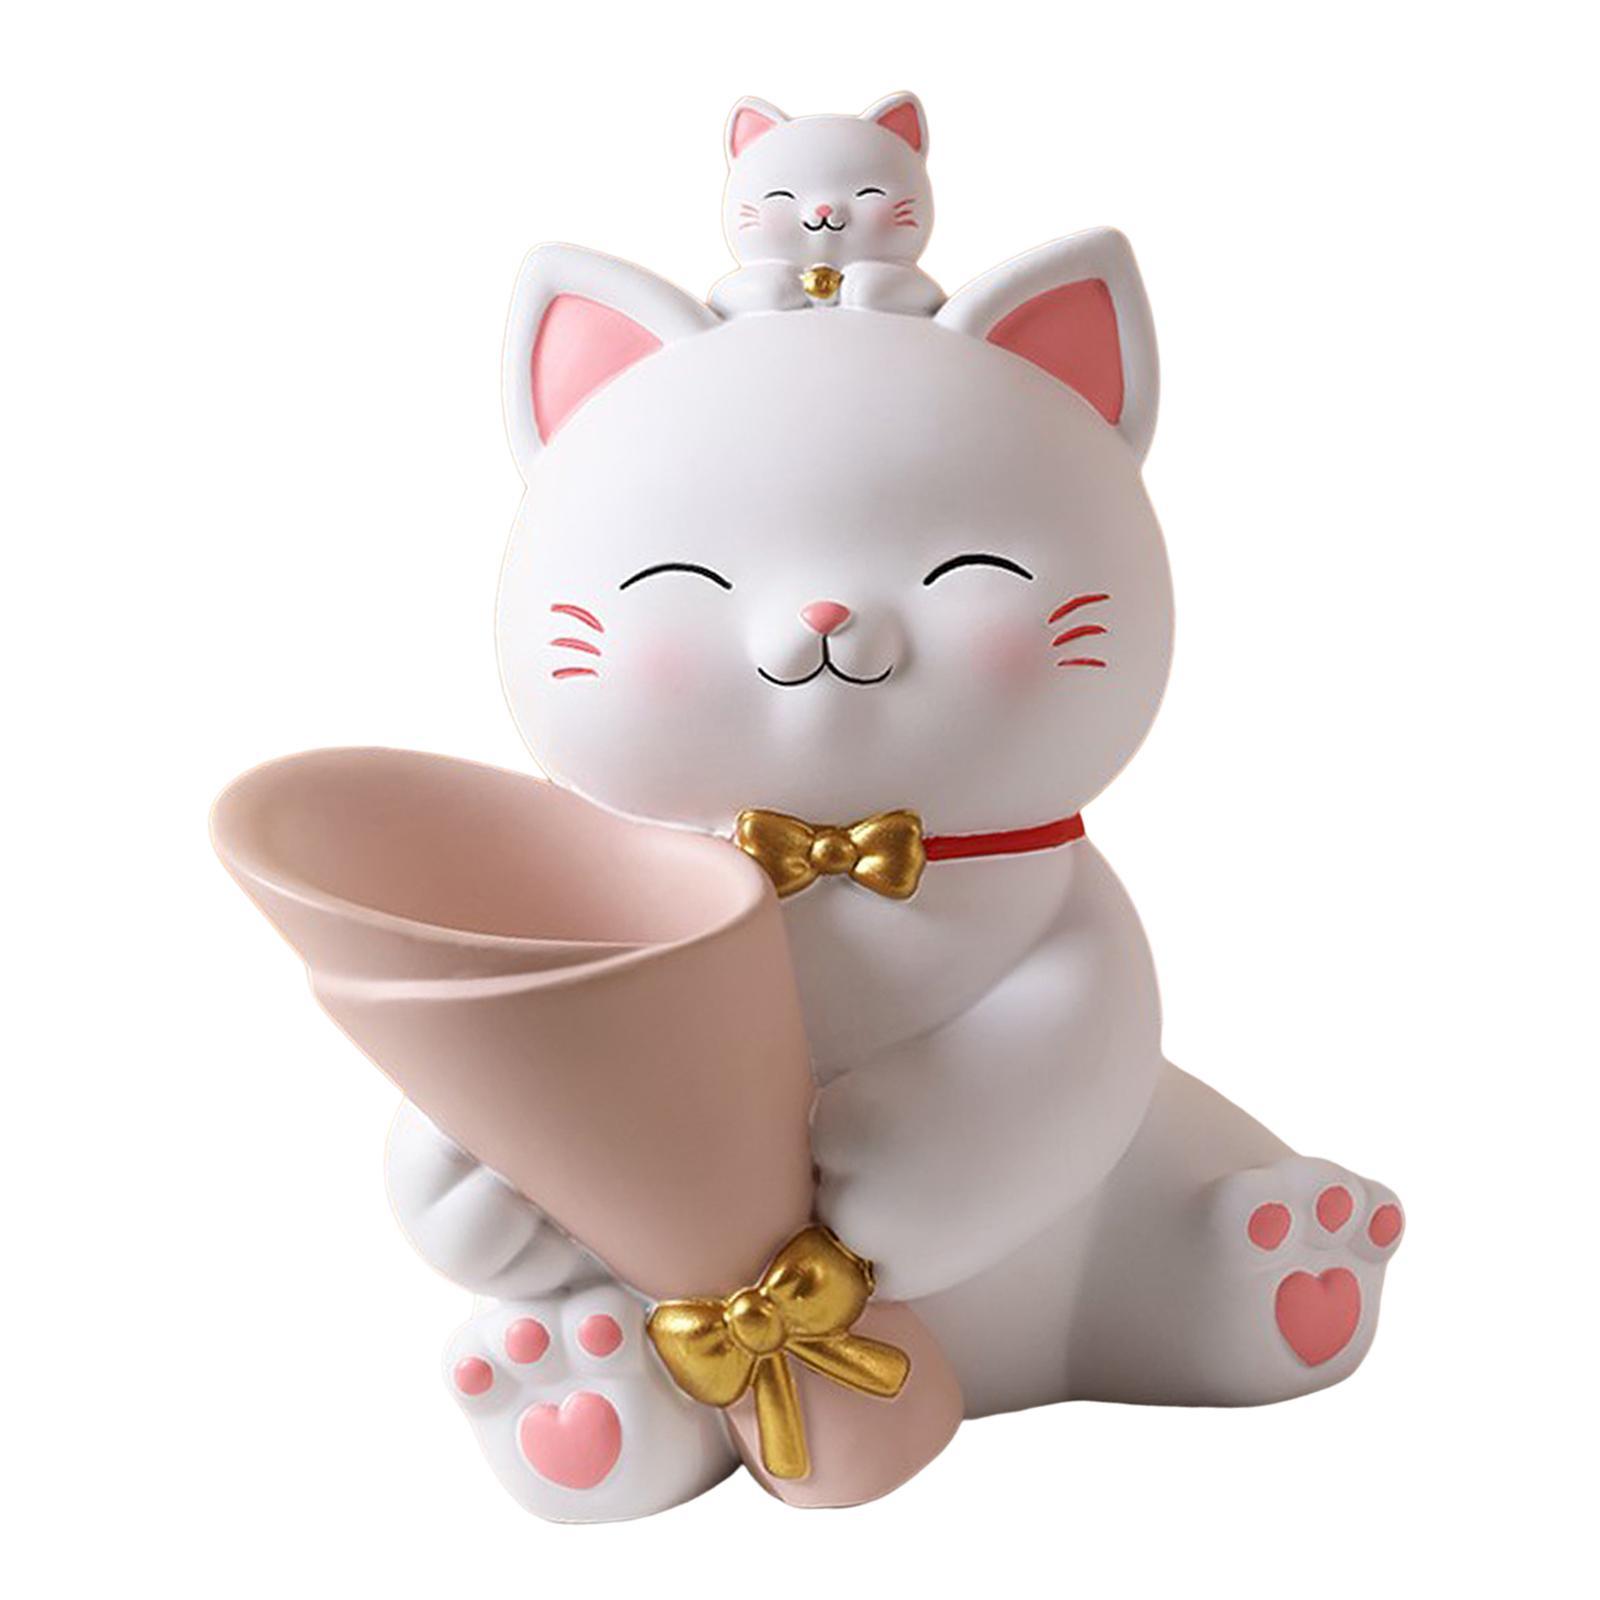 Minimalist Resin Cat Statue Figurines Planters Flower Pot Home Holder Flowers Vase for Housewarming Party Living Room Ornaments Wedding